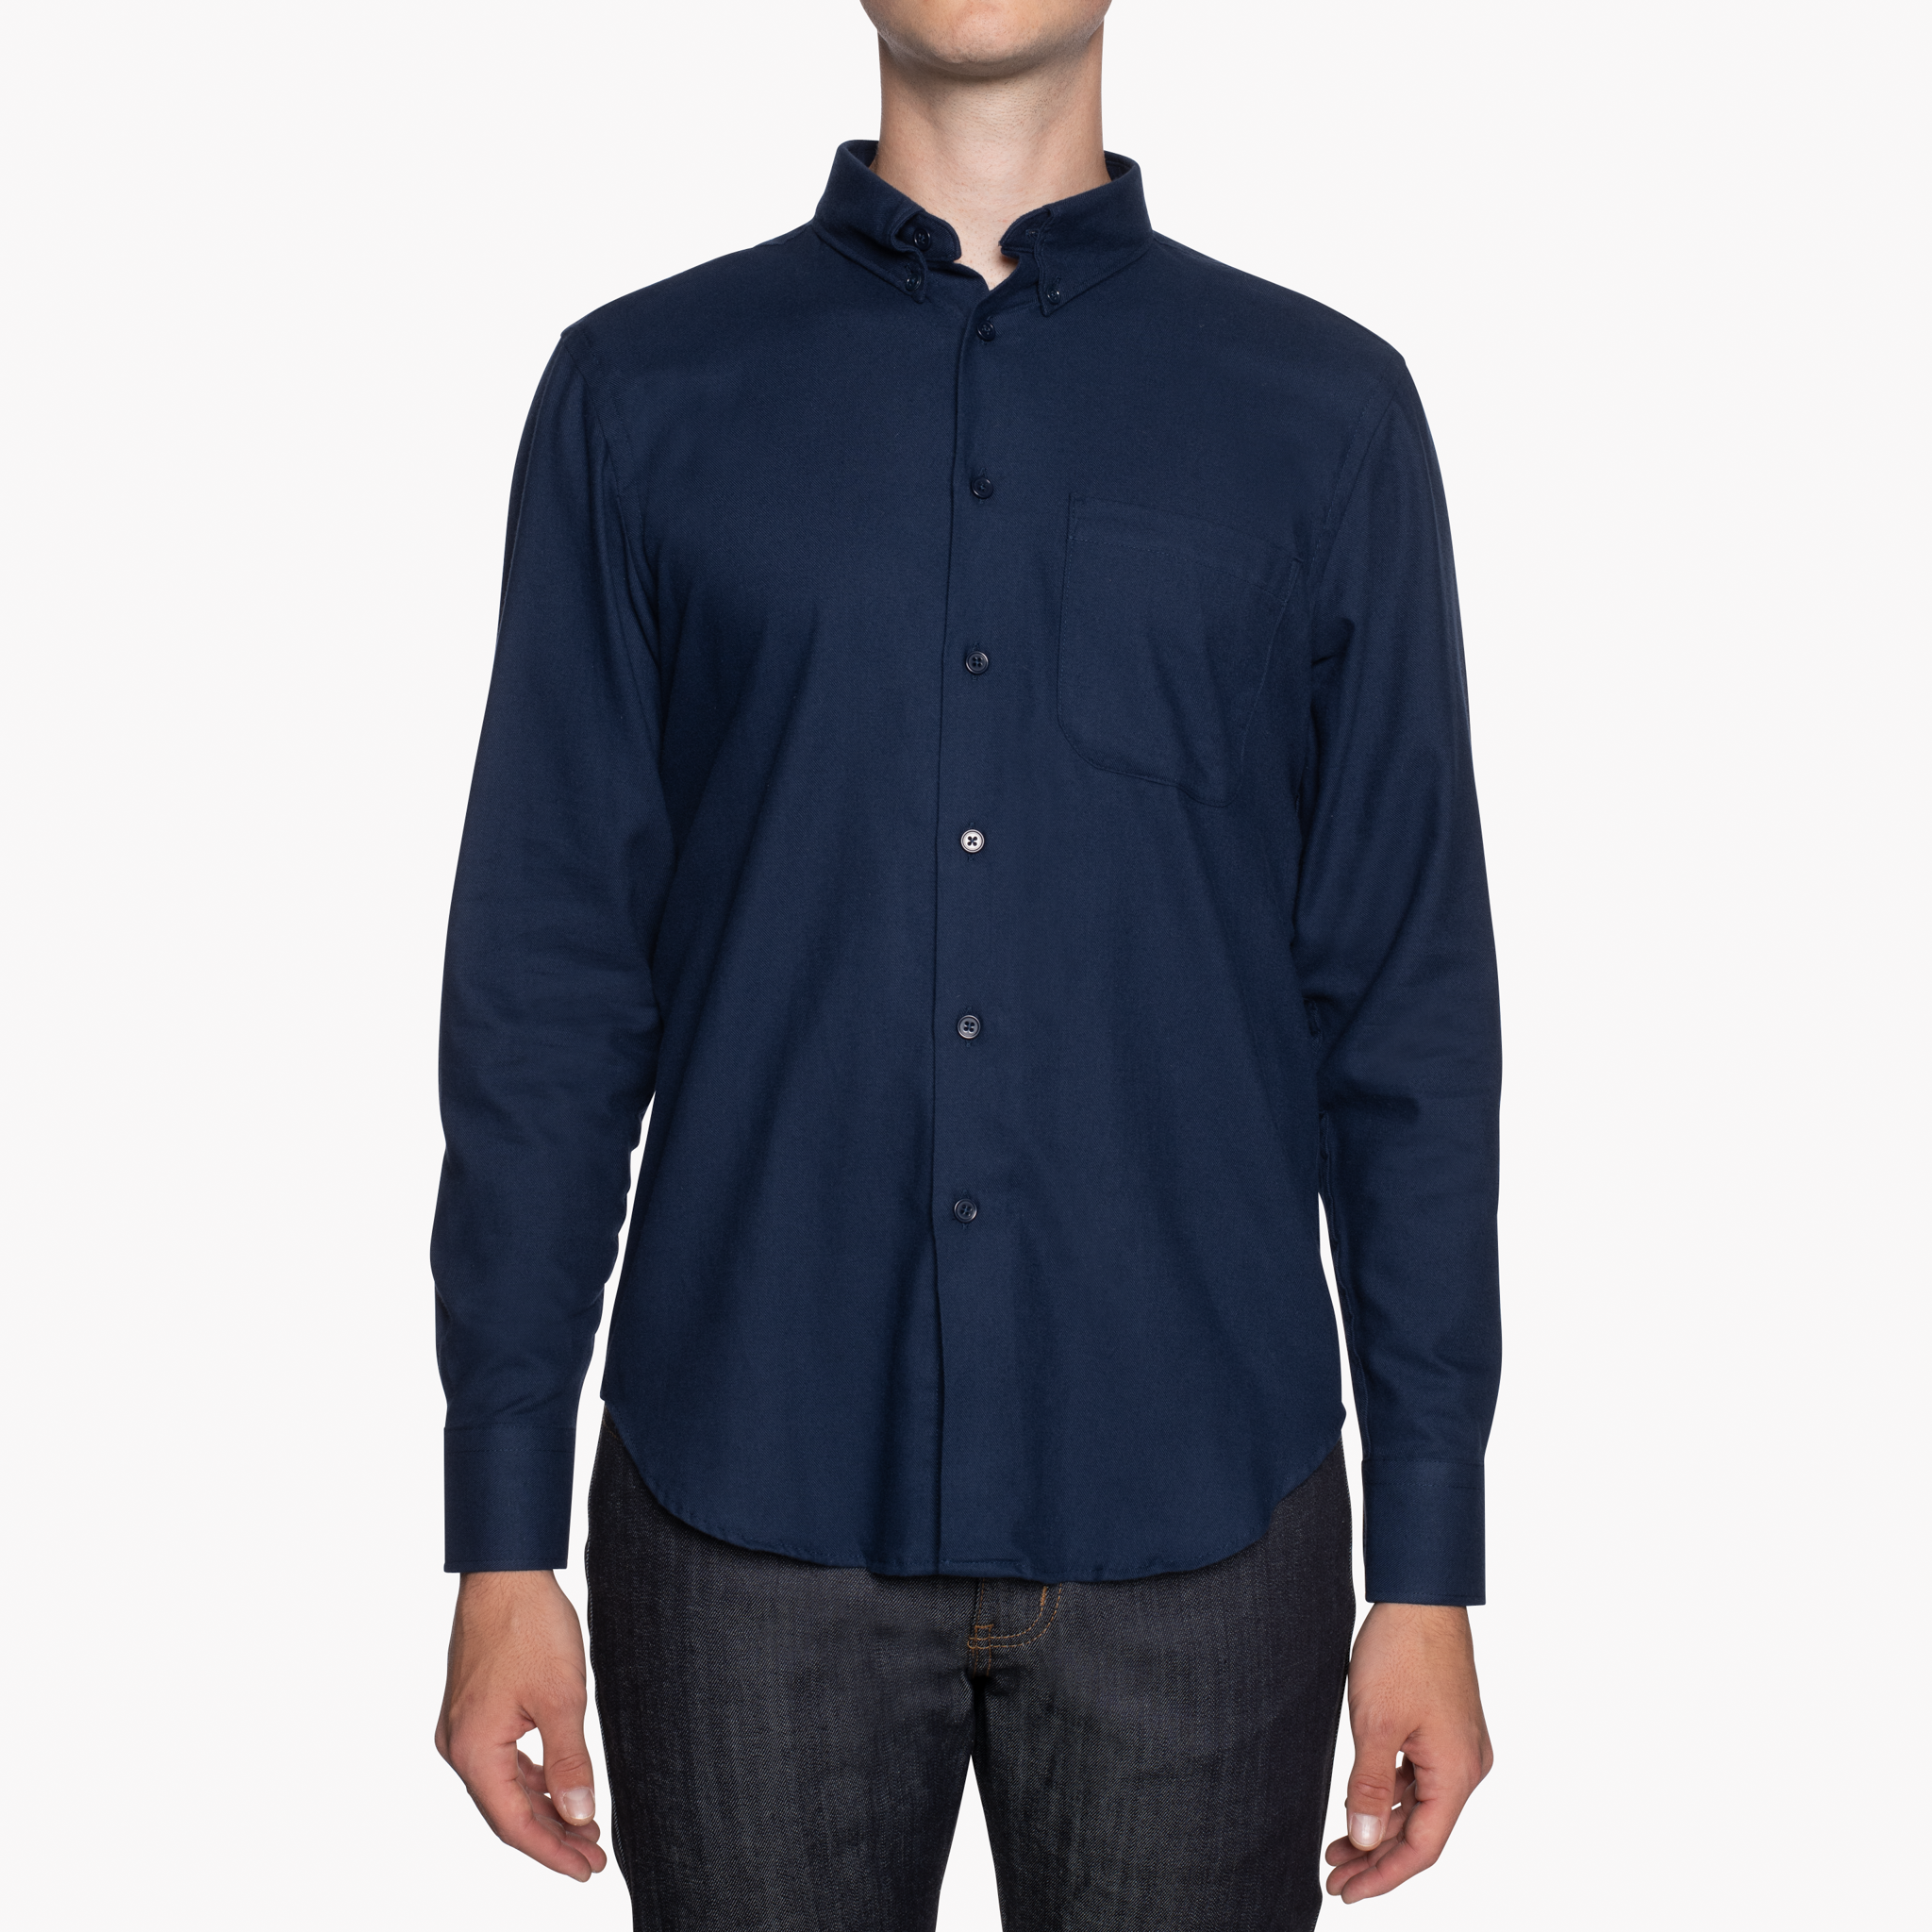  Easy Shirt - Soft Twill - Navy - front 